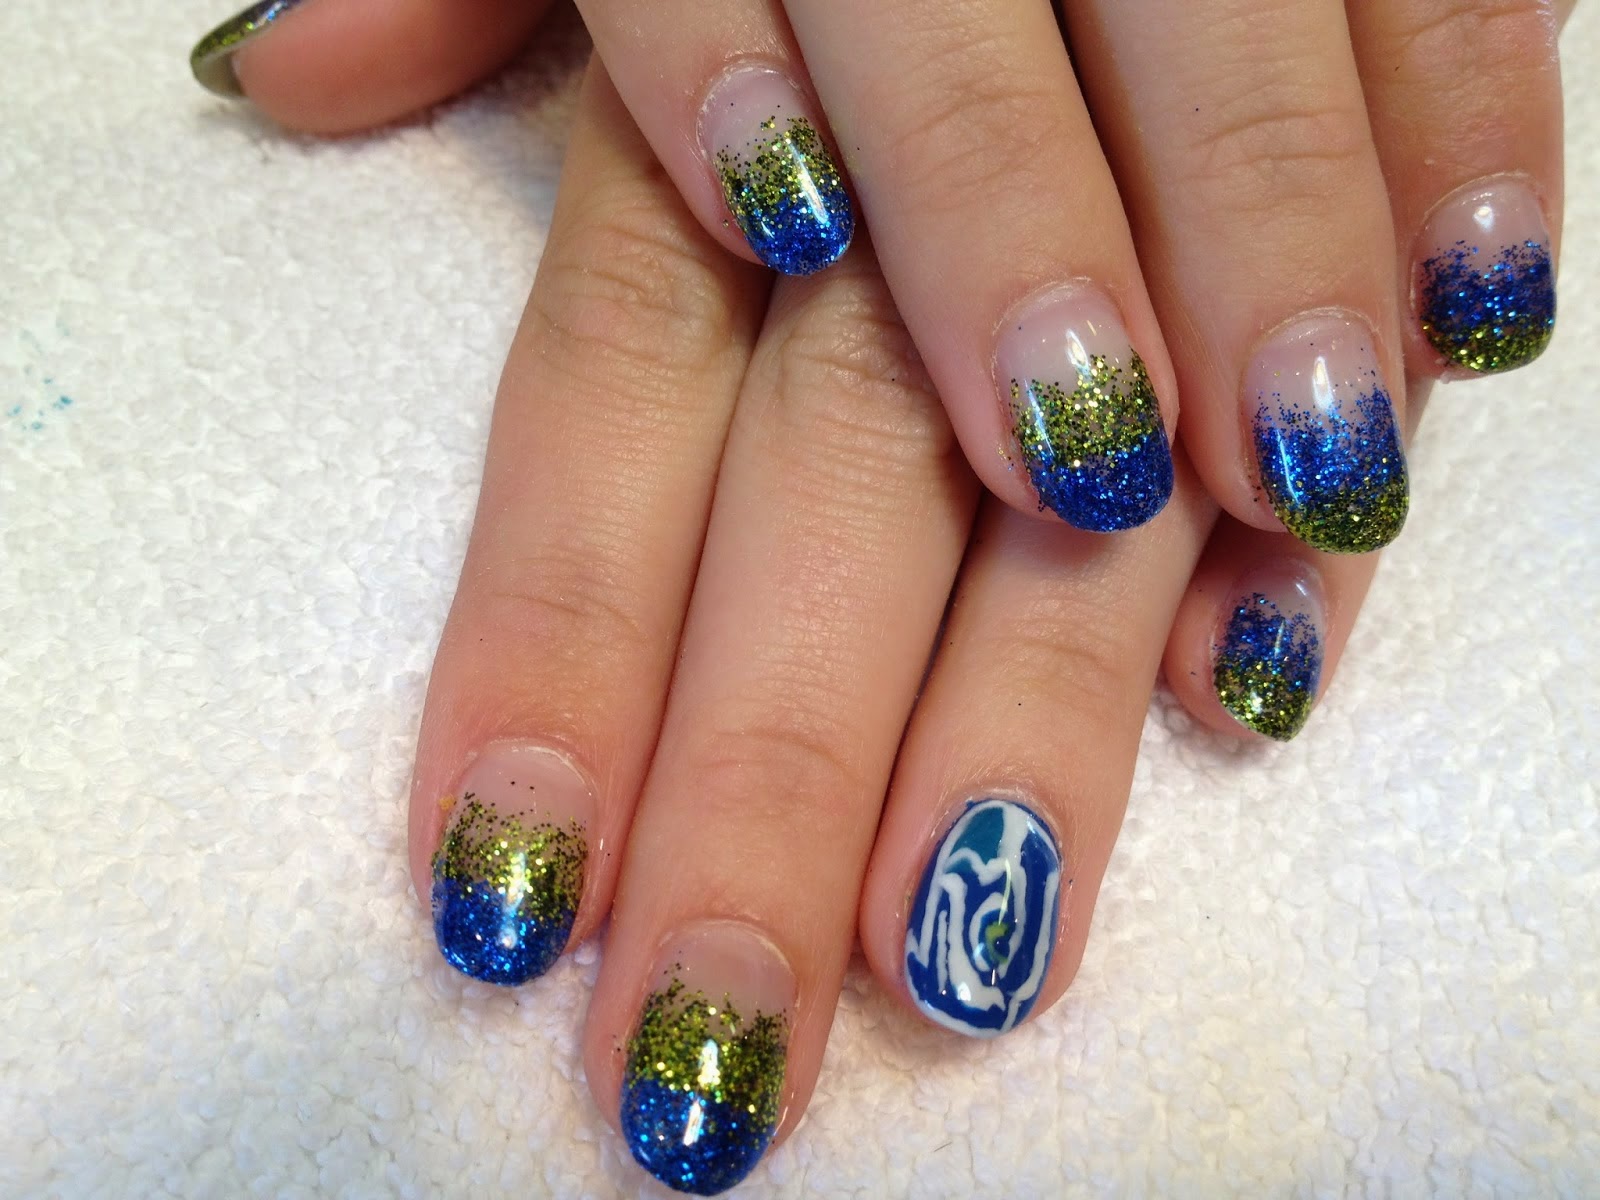 8. Seattle Seahawks Nail Designs for Game Day - wide 5